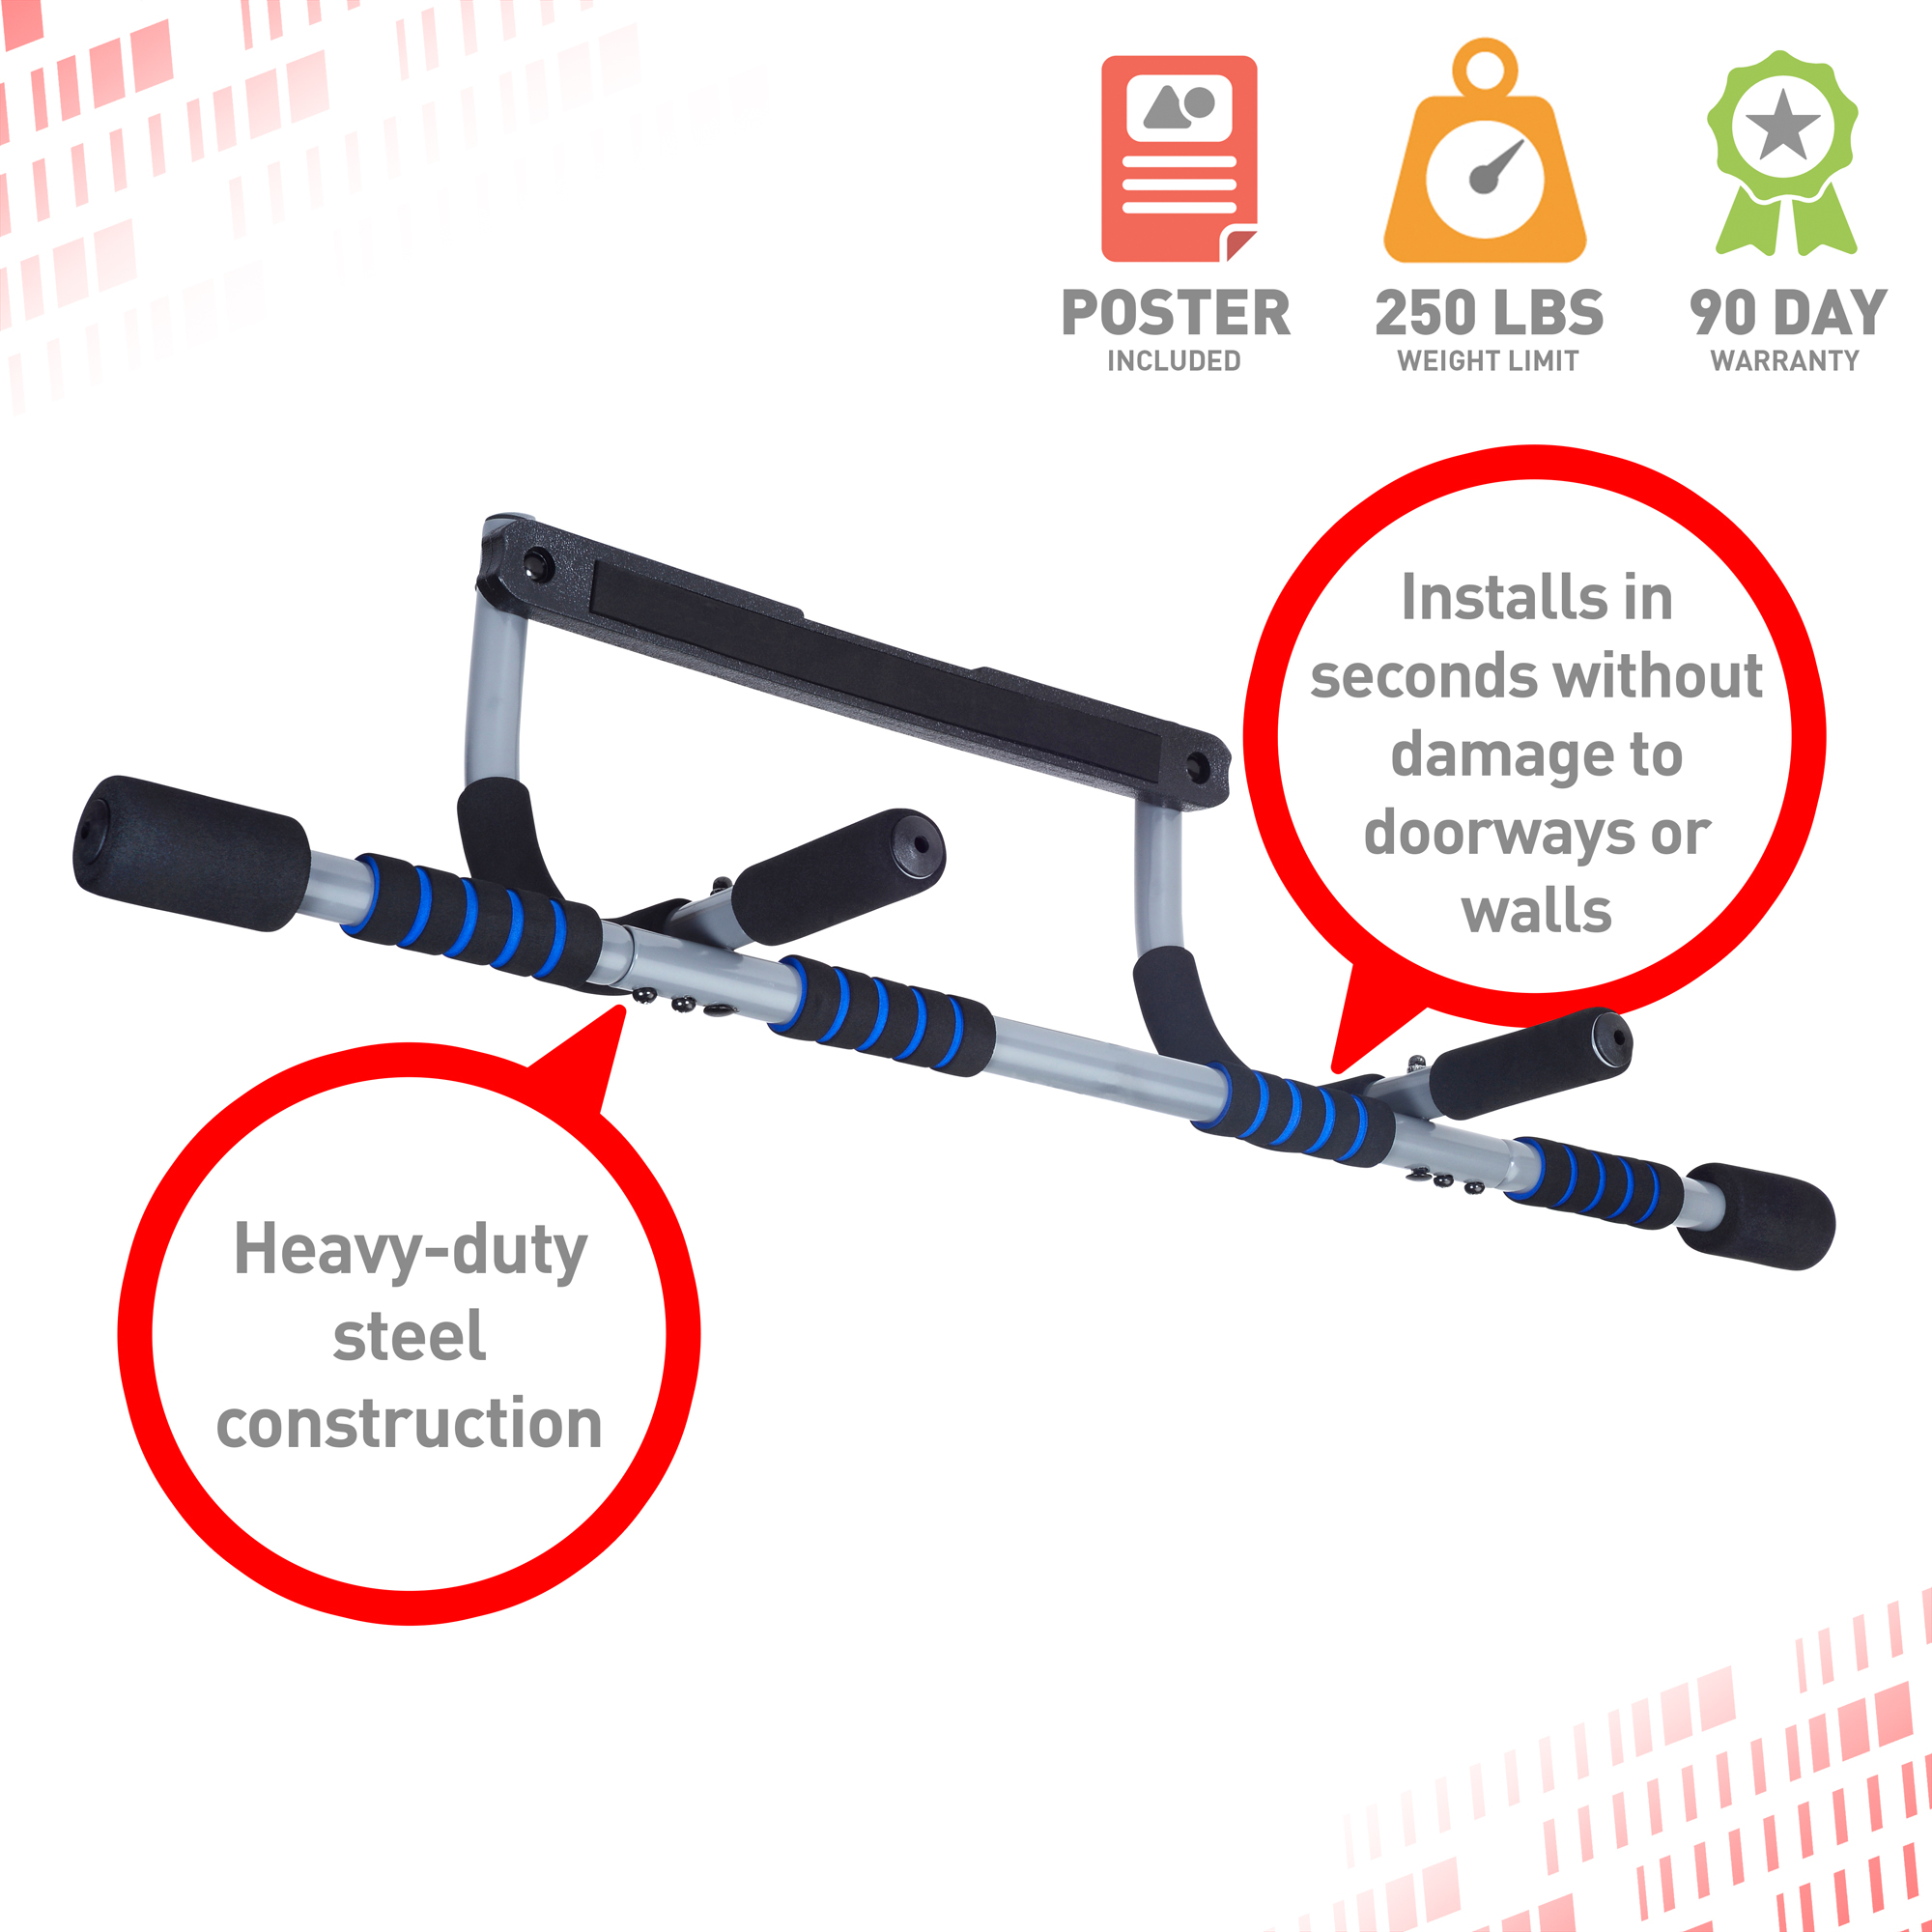 Pure Fitness Multi-Purpose Doorway Pull-Up Bar, 250lb Weight Limit - image 2 of 5